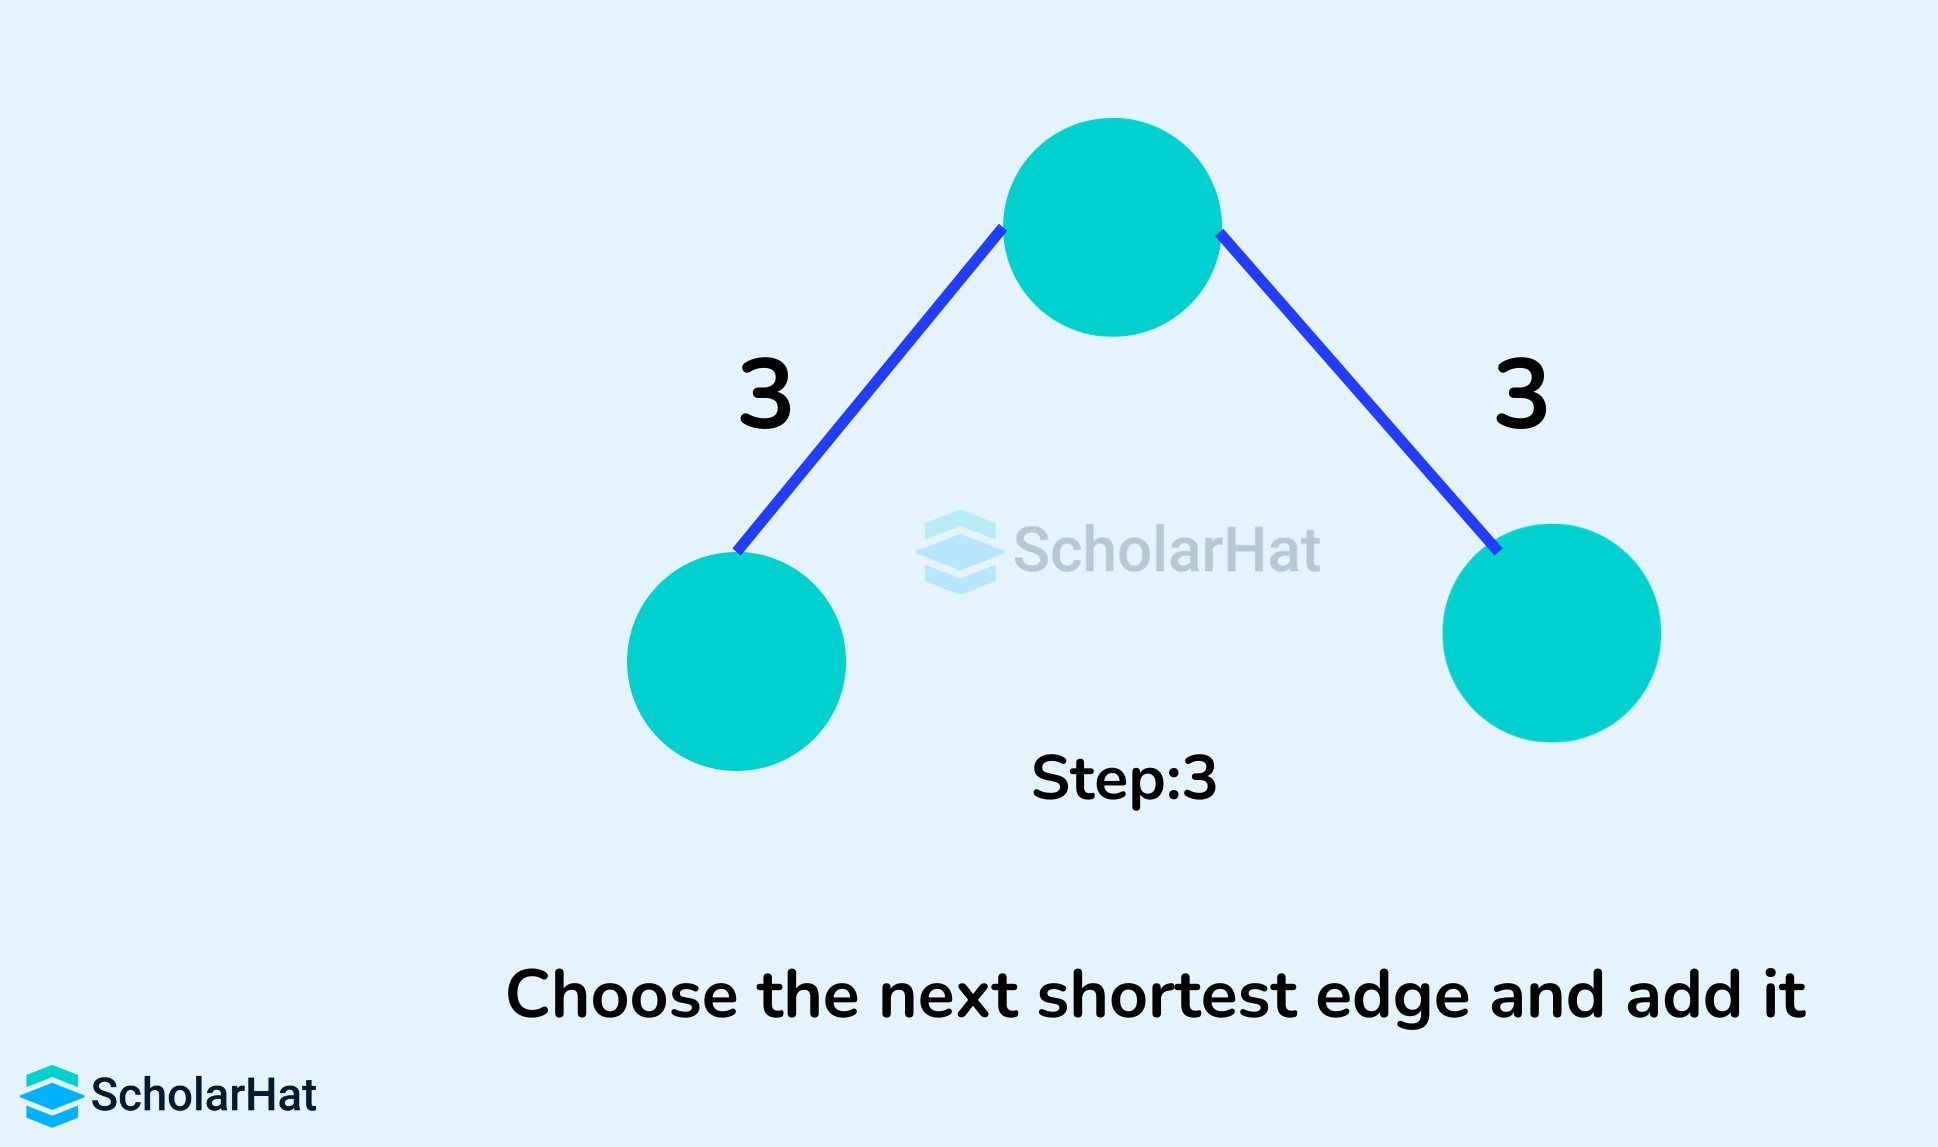 Choose the next shortest edge and add it